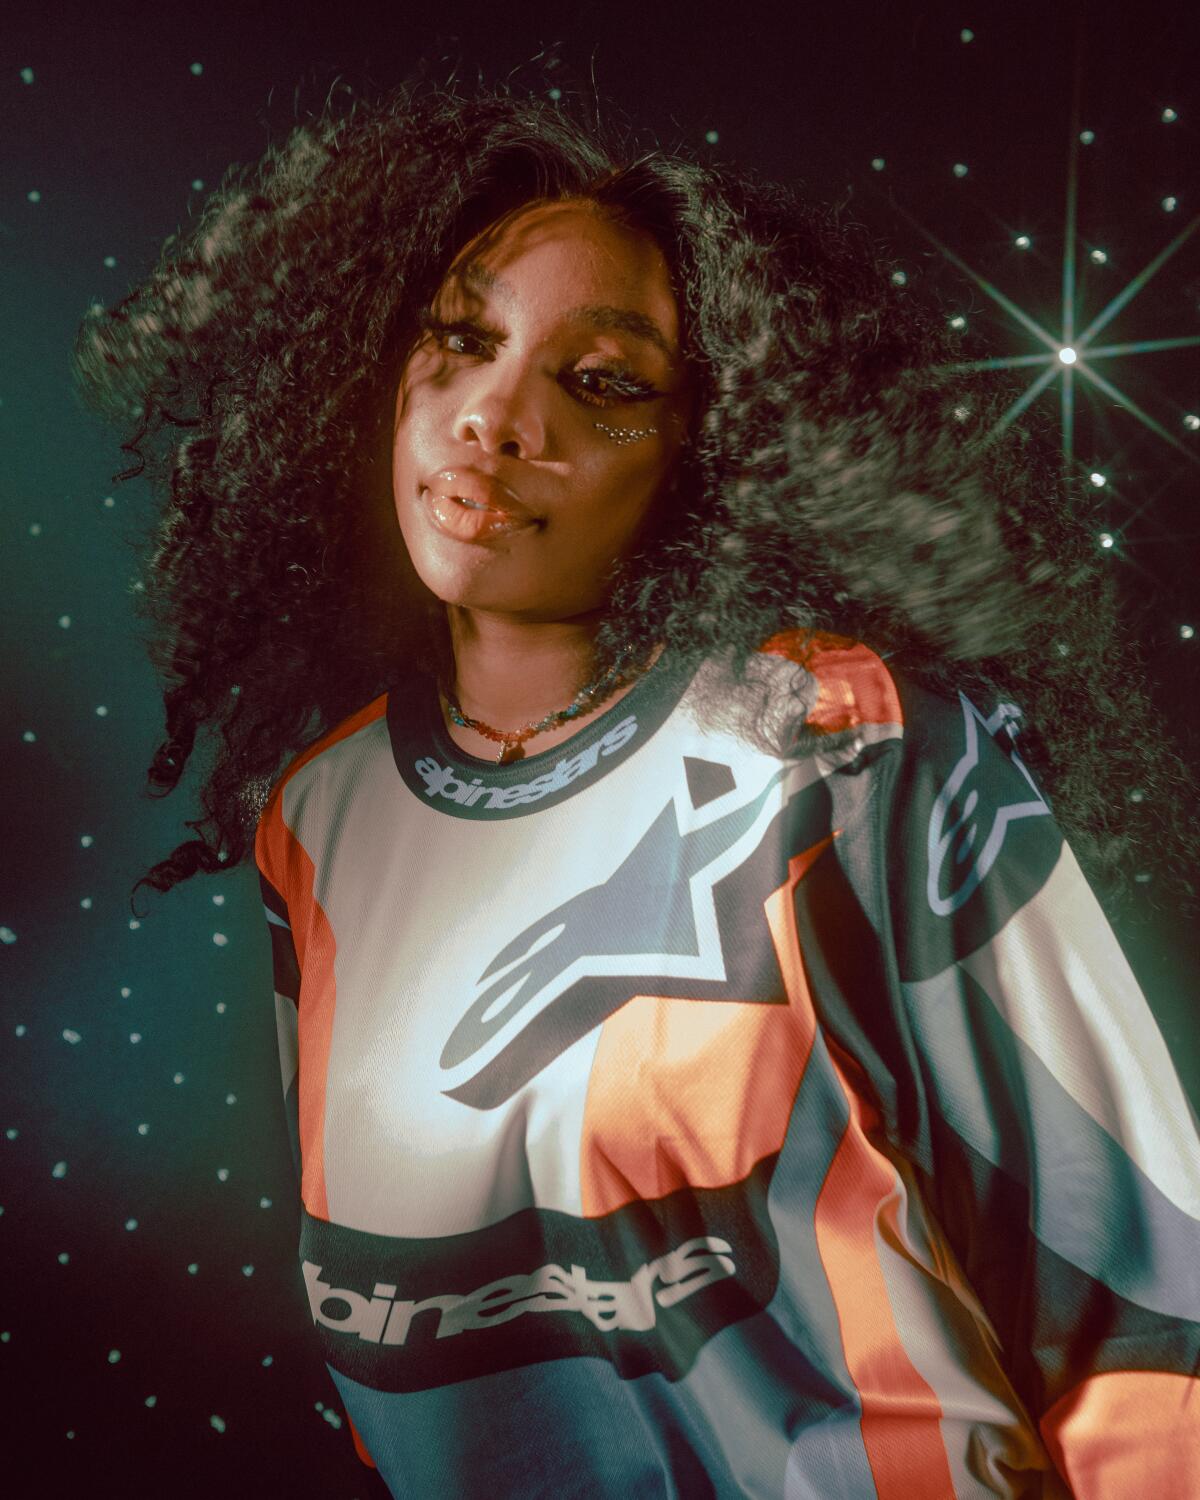 SZA is photographed in front of a celestial backdrop.